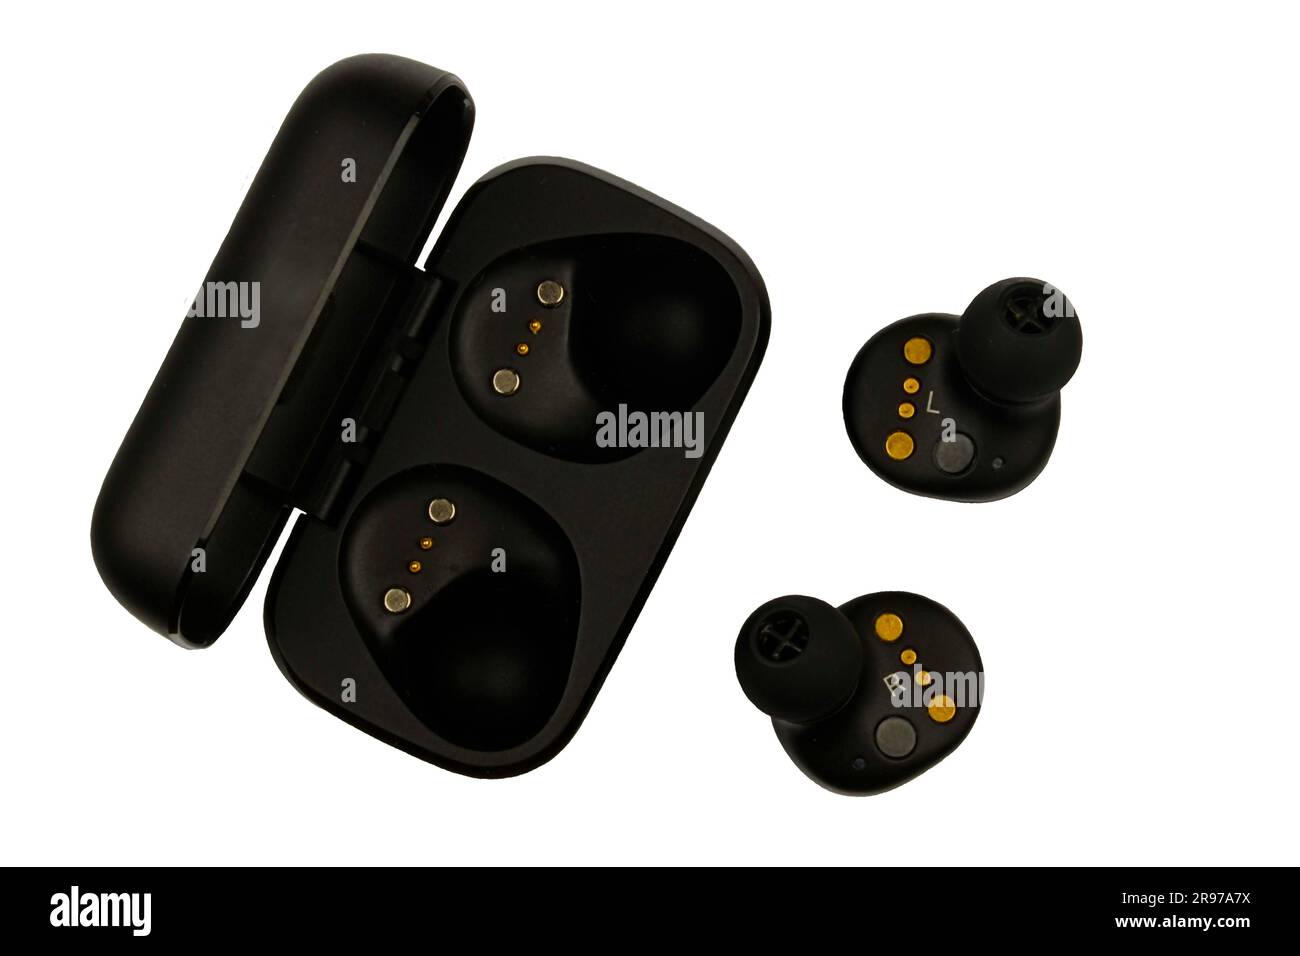 Wireless stereo earbuds. Black wireless earphones and charging case. Earbuds or headphones and charging case with bult-in rechargeable battery for the Stock Photo